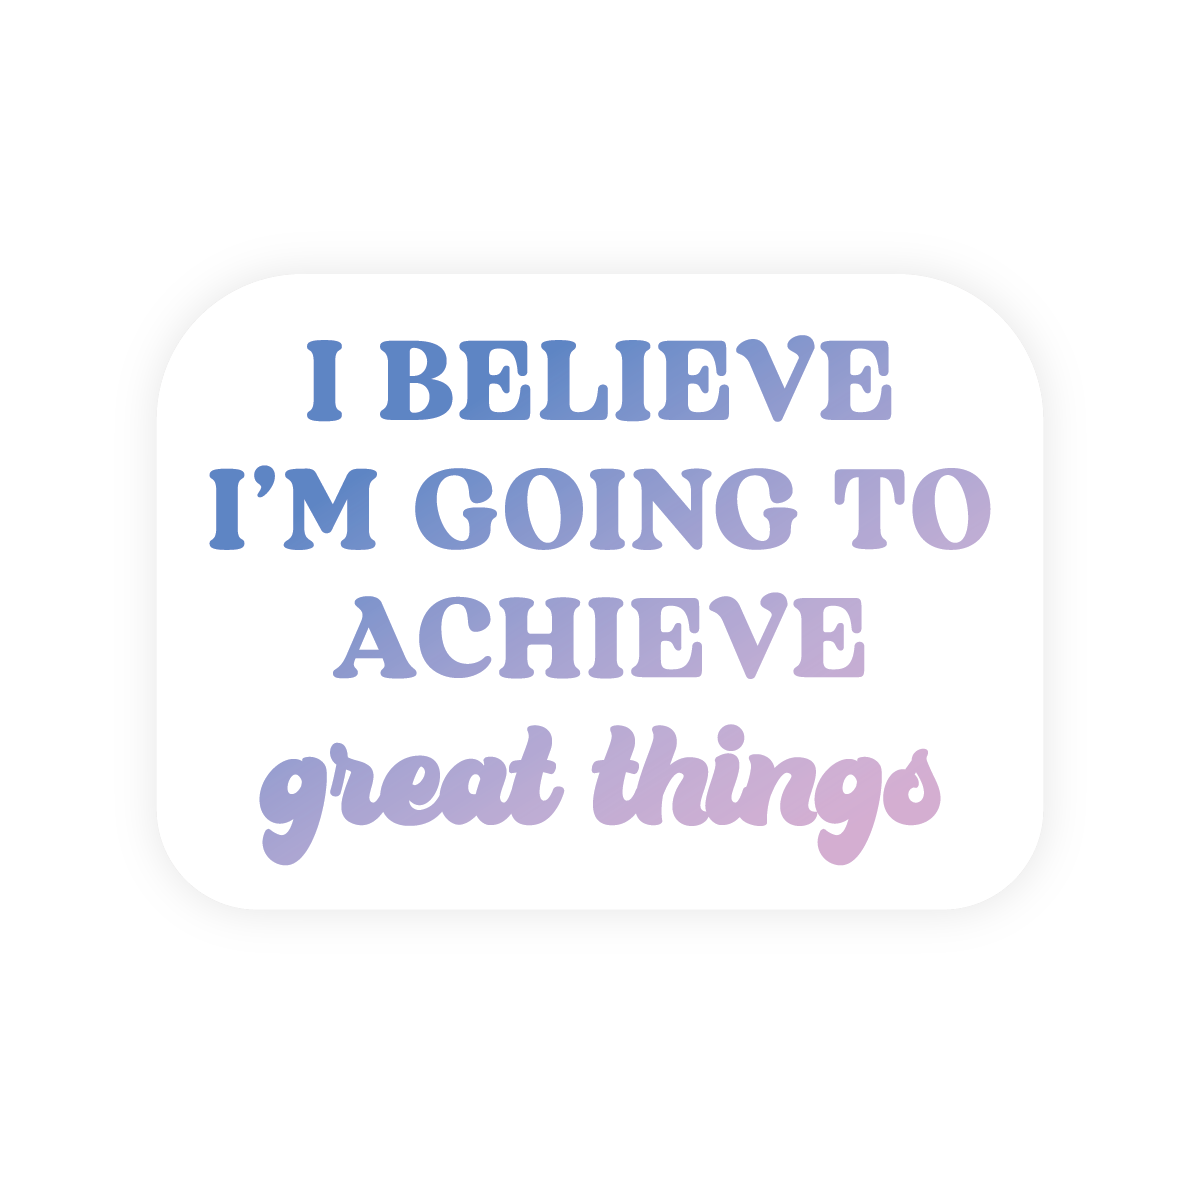 Inspirational Restickable Sticker - Achieve Great Things